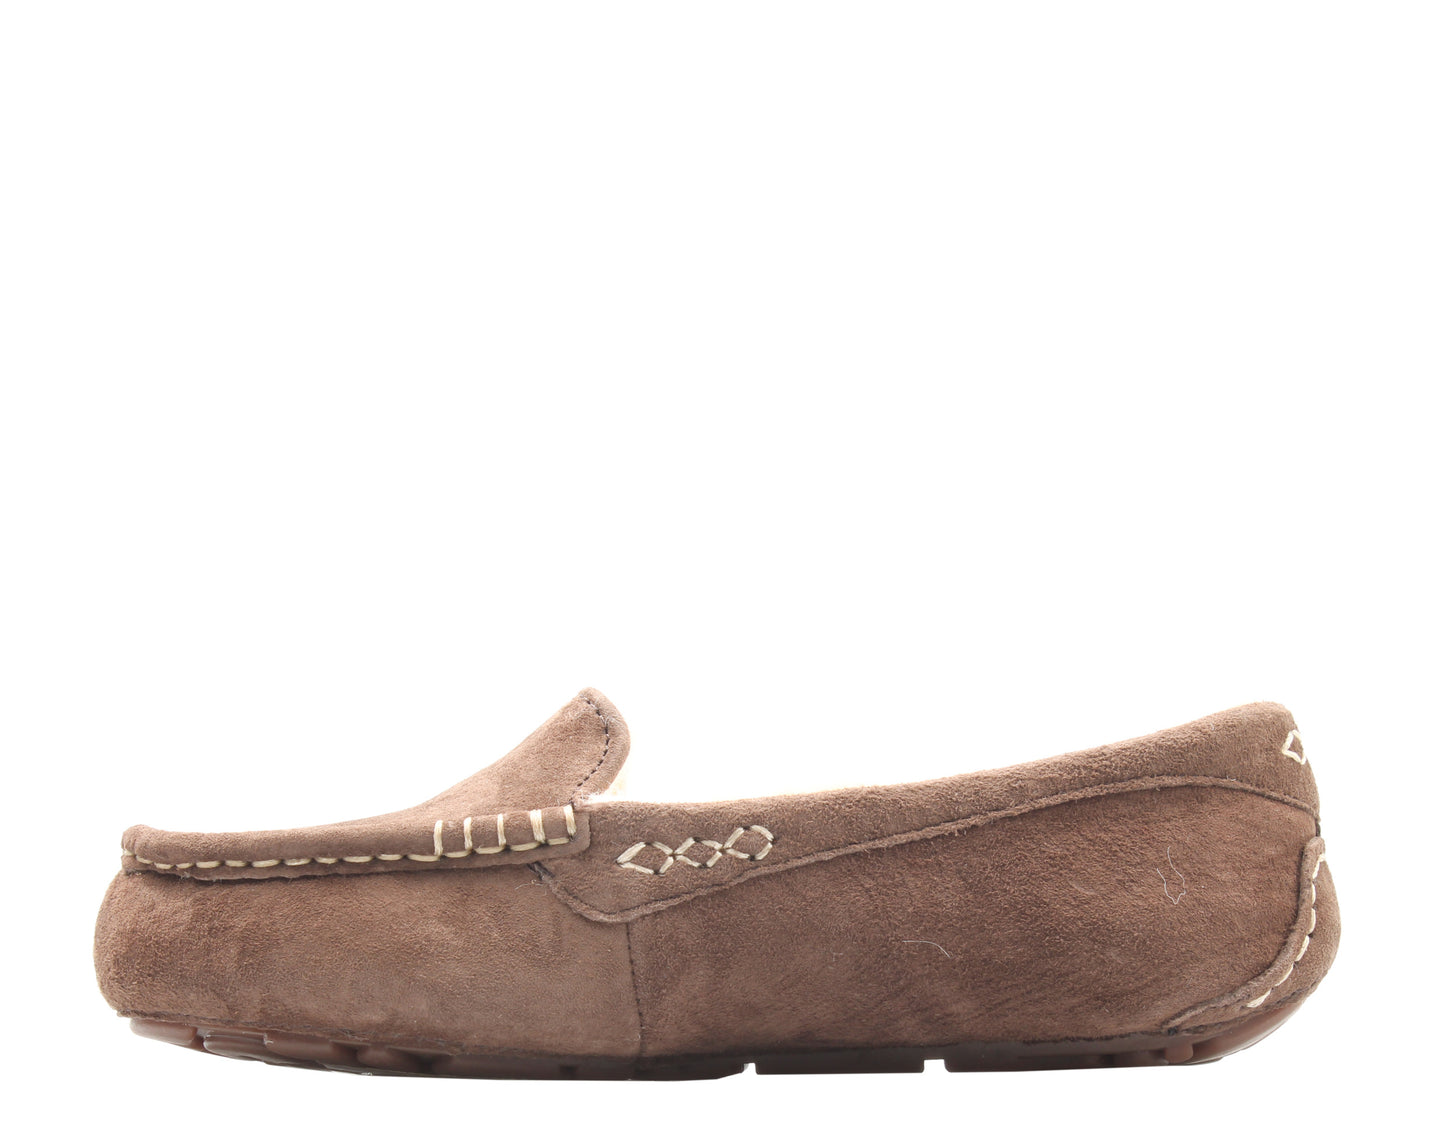 UGG Australia Ansley Moccasin Chocolate Brown Women's Slippers 3312-CHO